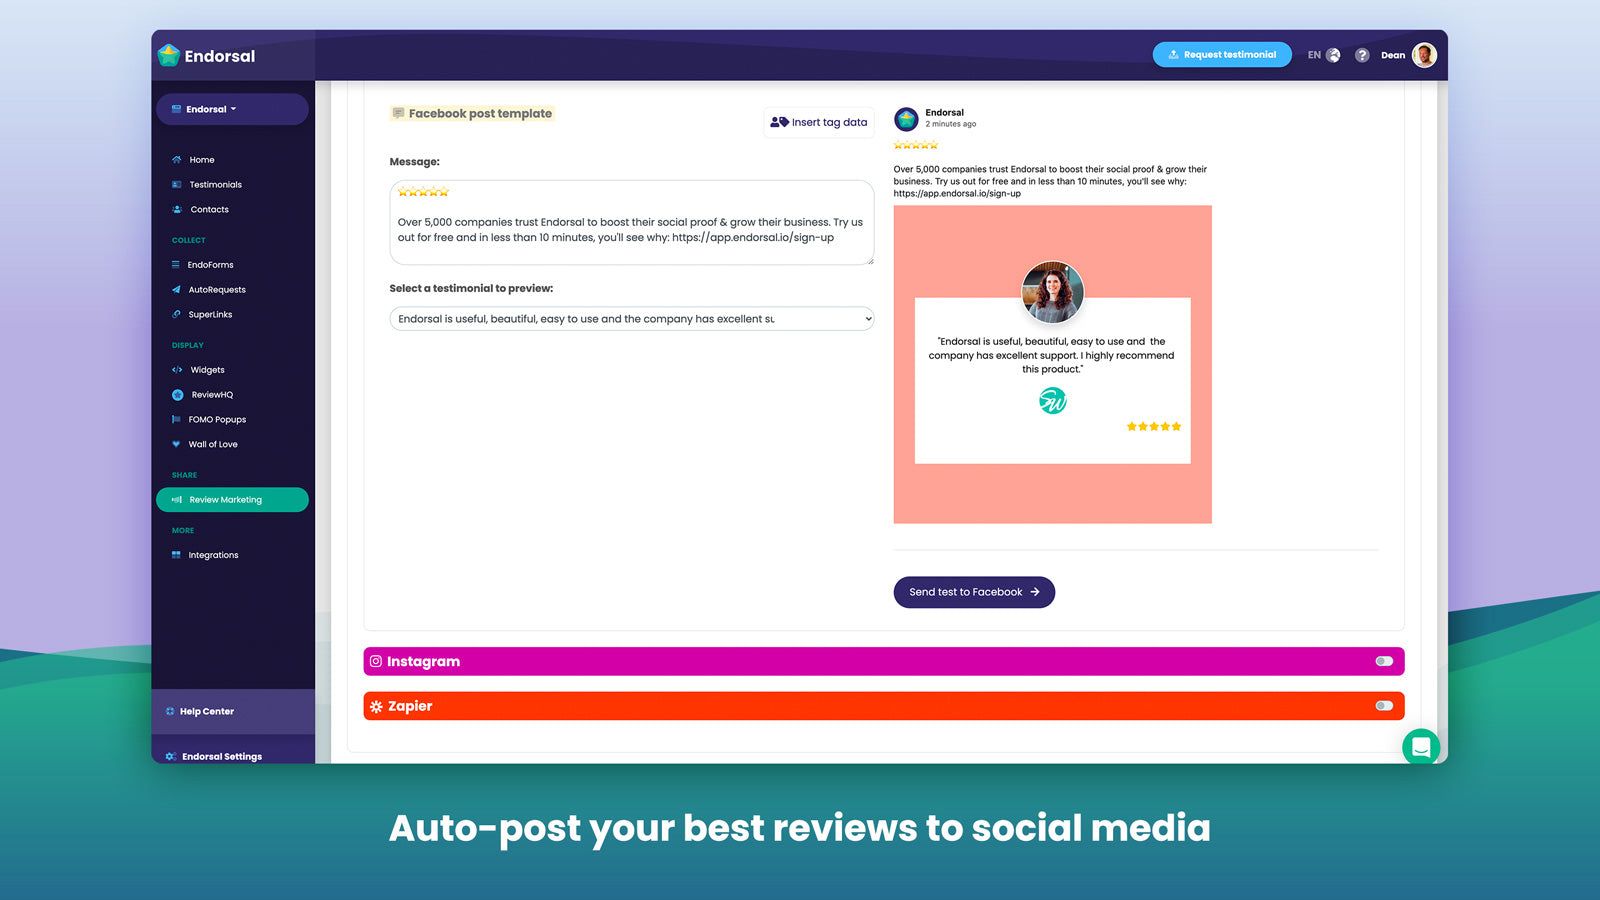 Auto-post your best reviews to social media